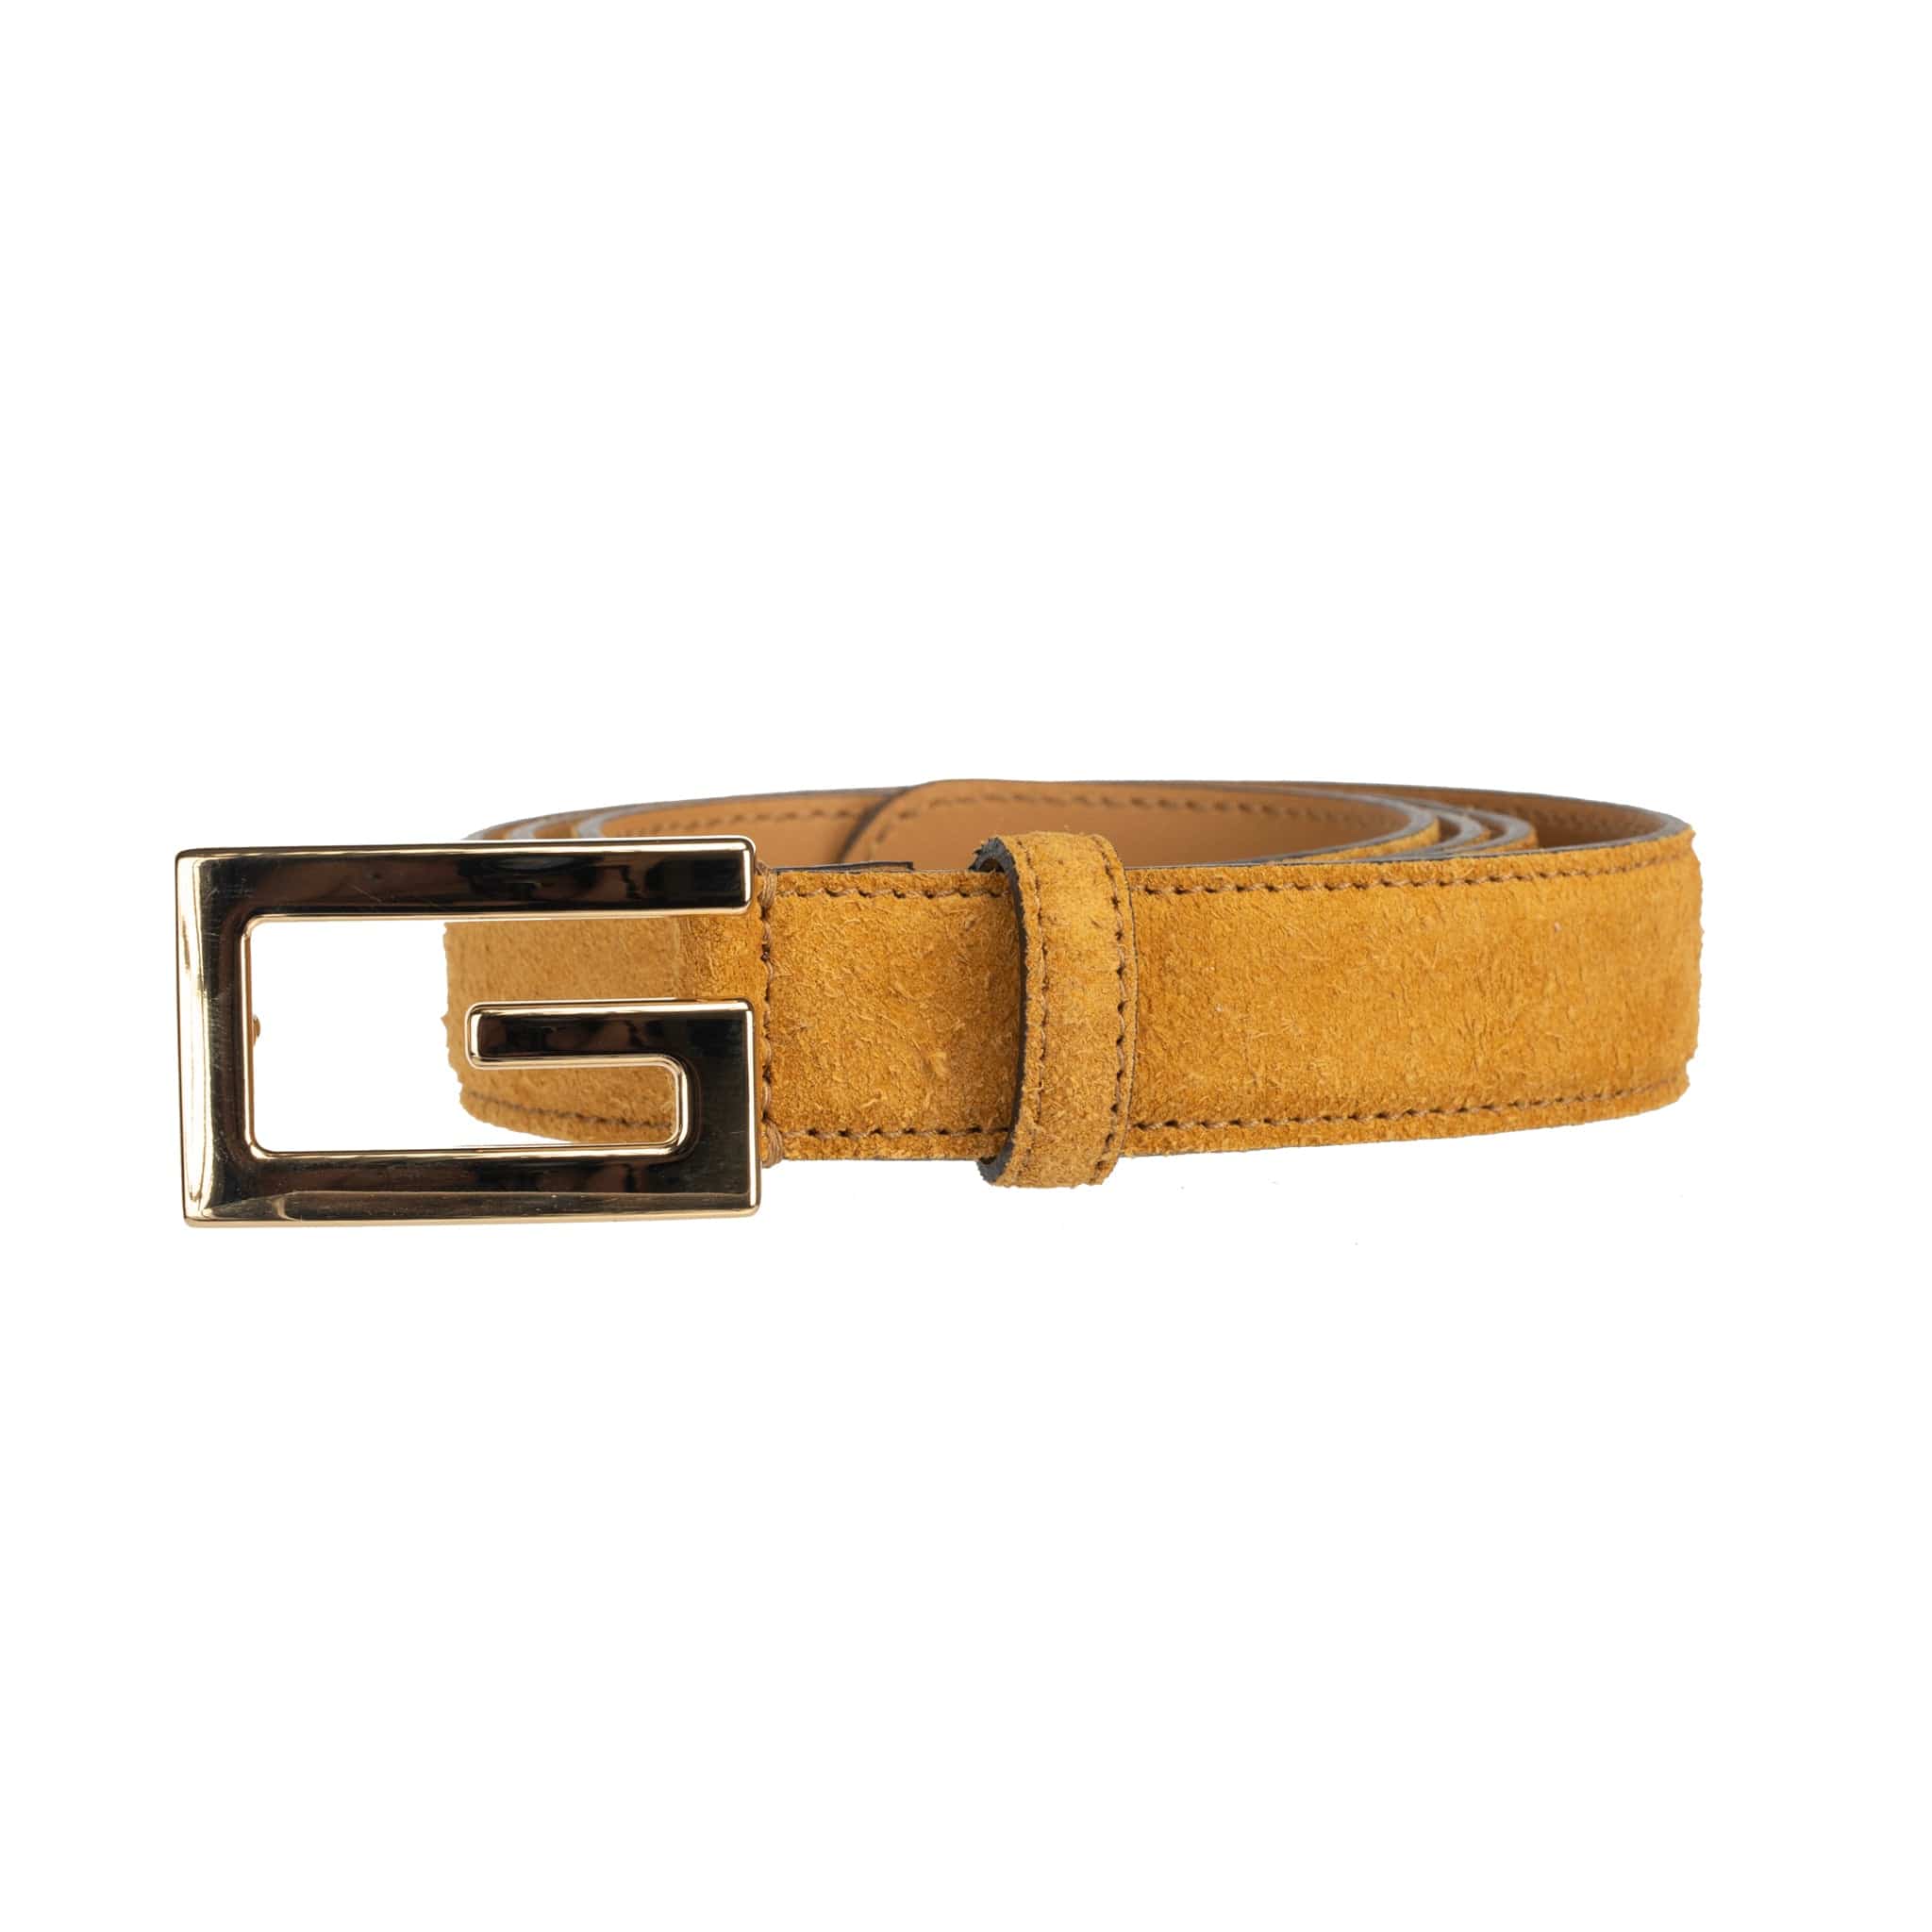 GUCCI ICARO BELT SAFFRON SUEDE LEATHER GOLD HARDWARE - On Repeat